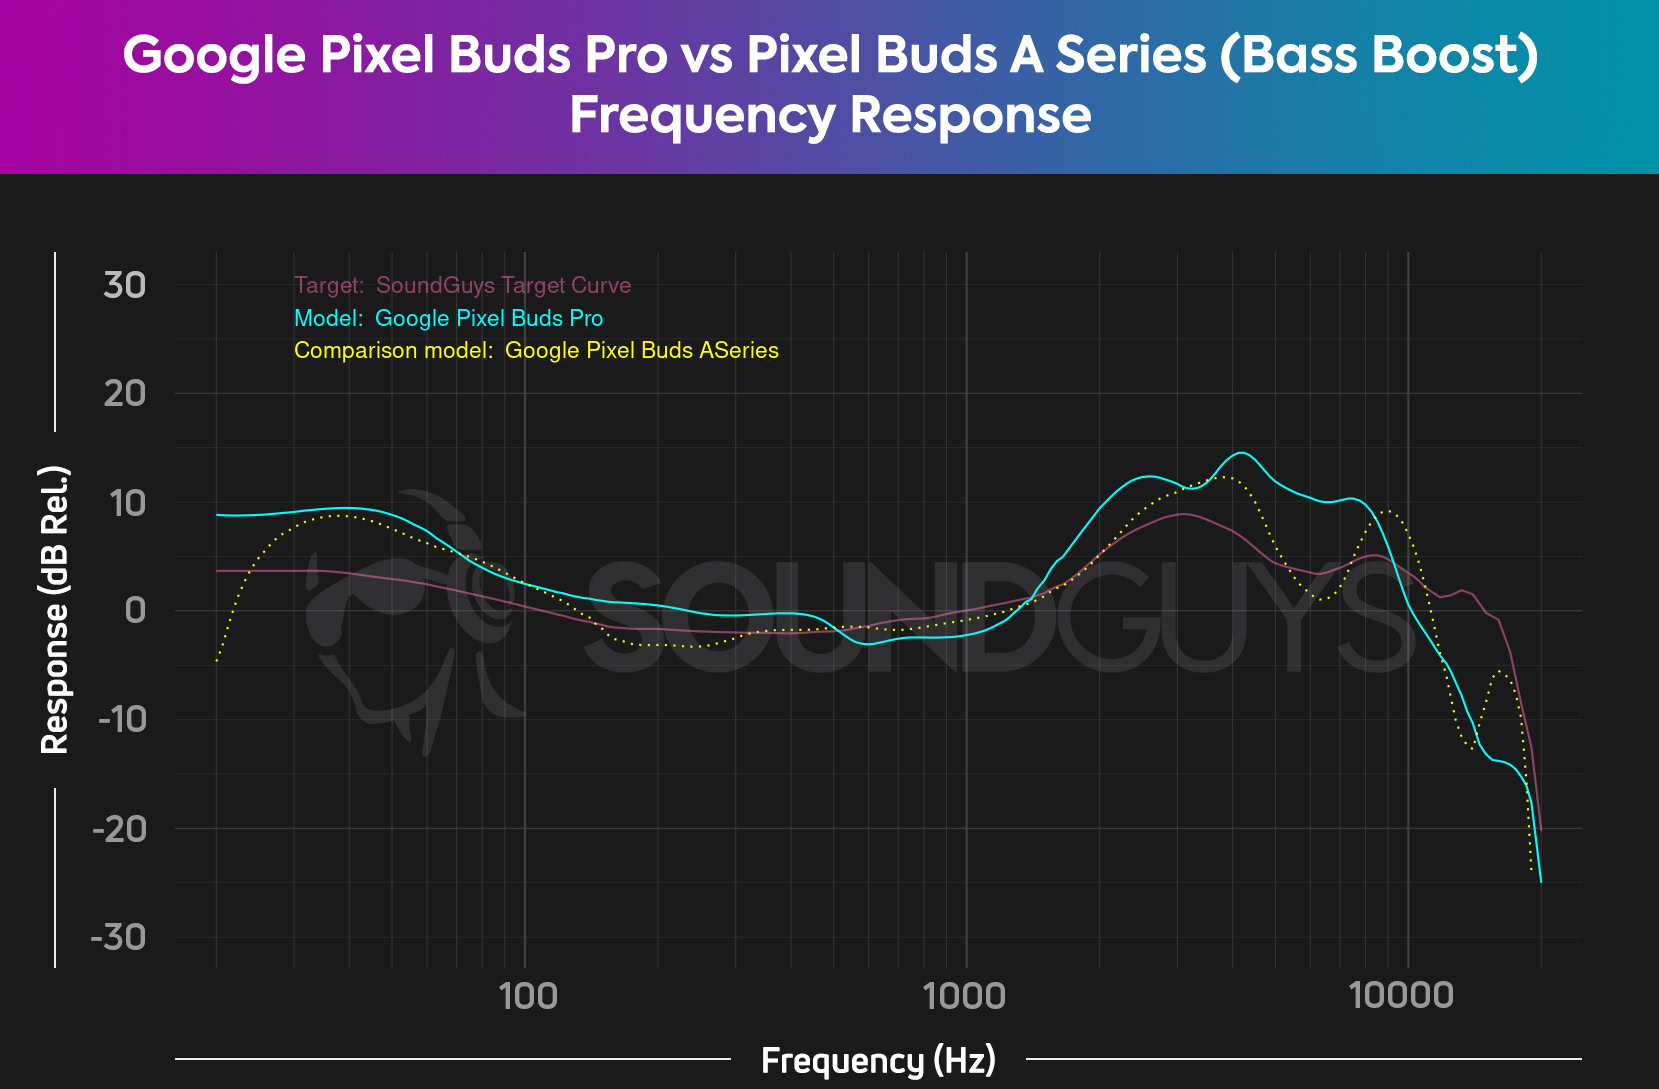 A chart compares the Google Pixel Buds Pro and Google Pixel Buds A Series (Bass Boost EQ) frequency responses, revealing the A Series are closer to the SoundGuys Target Curve.